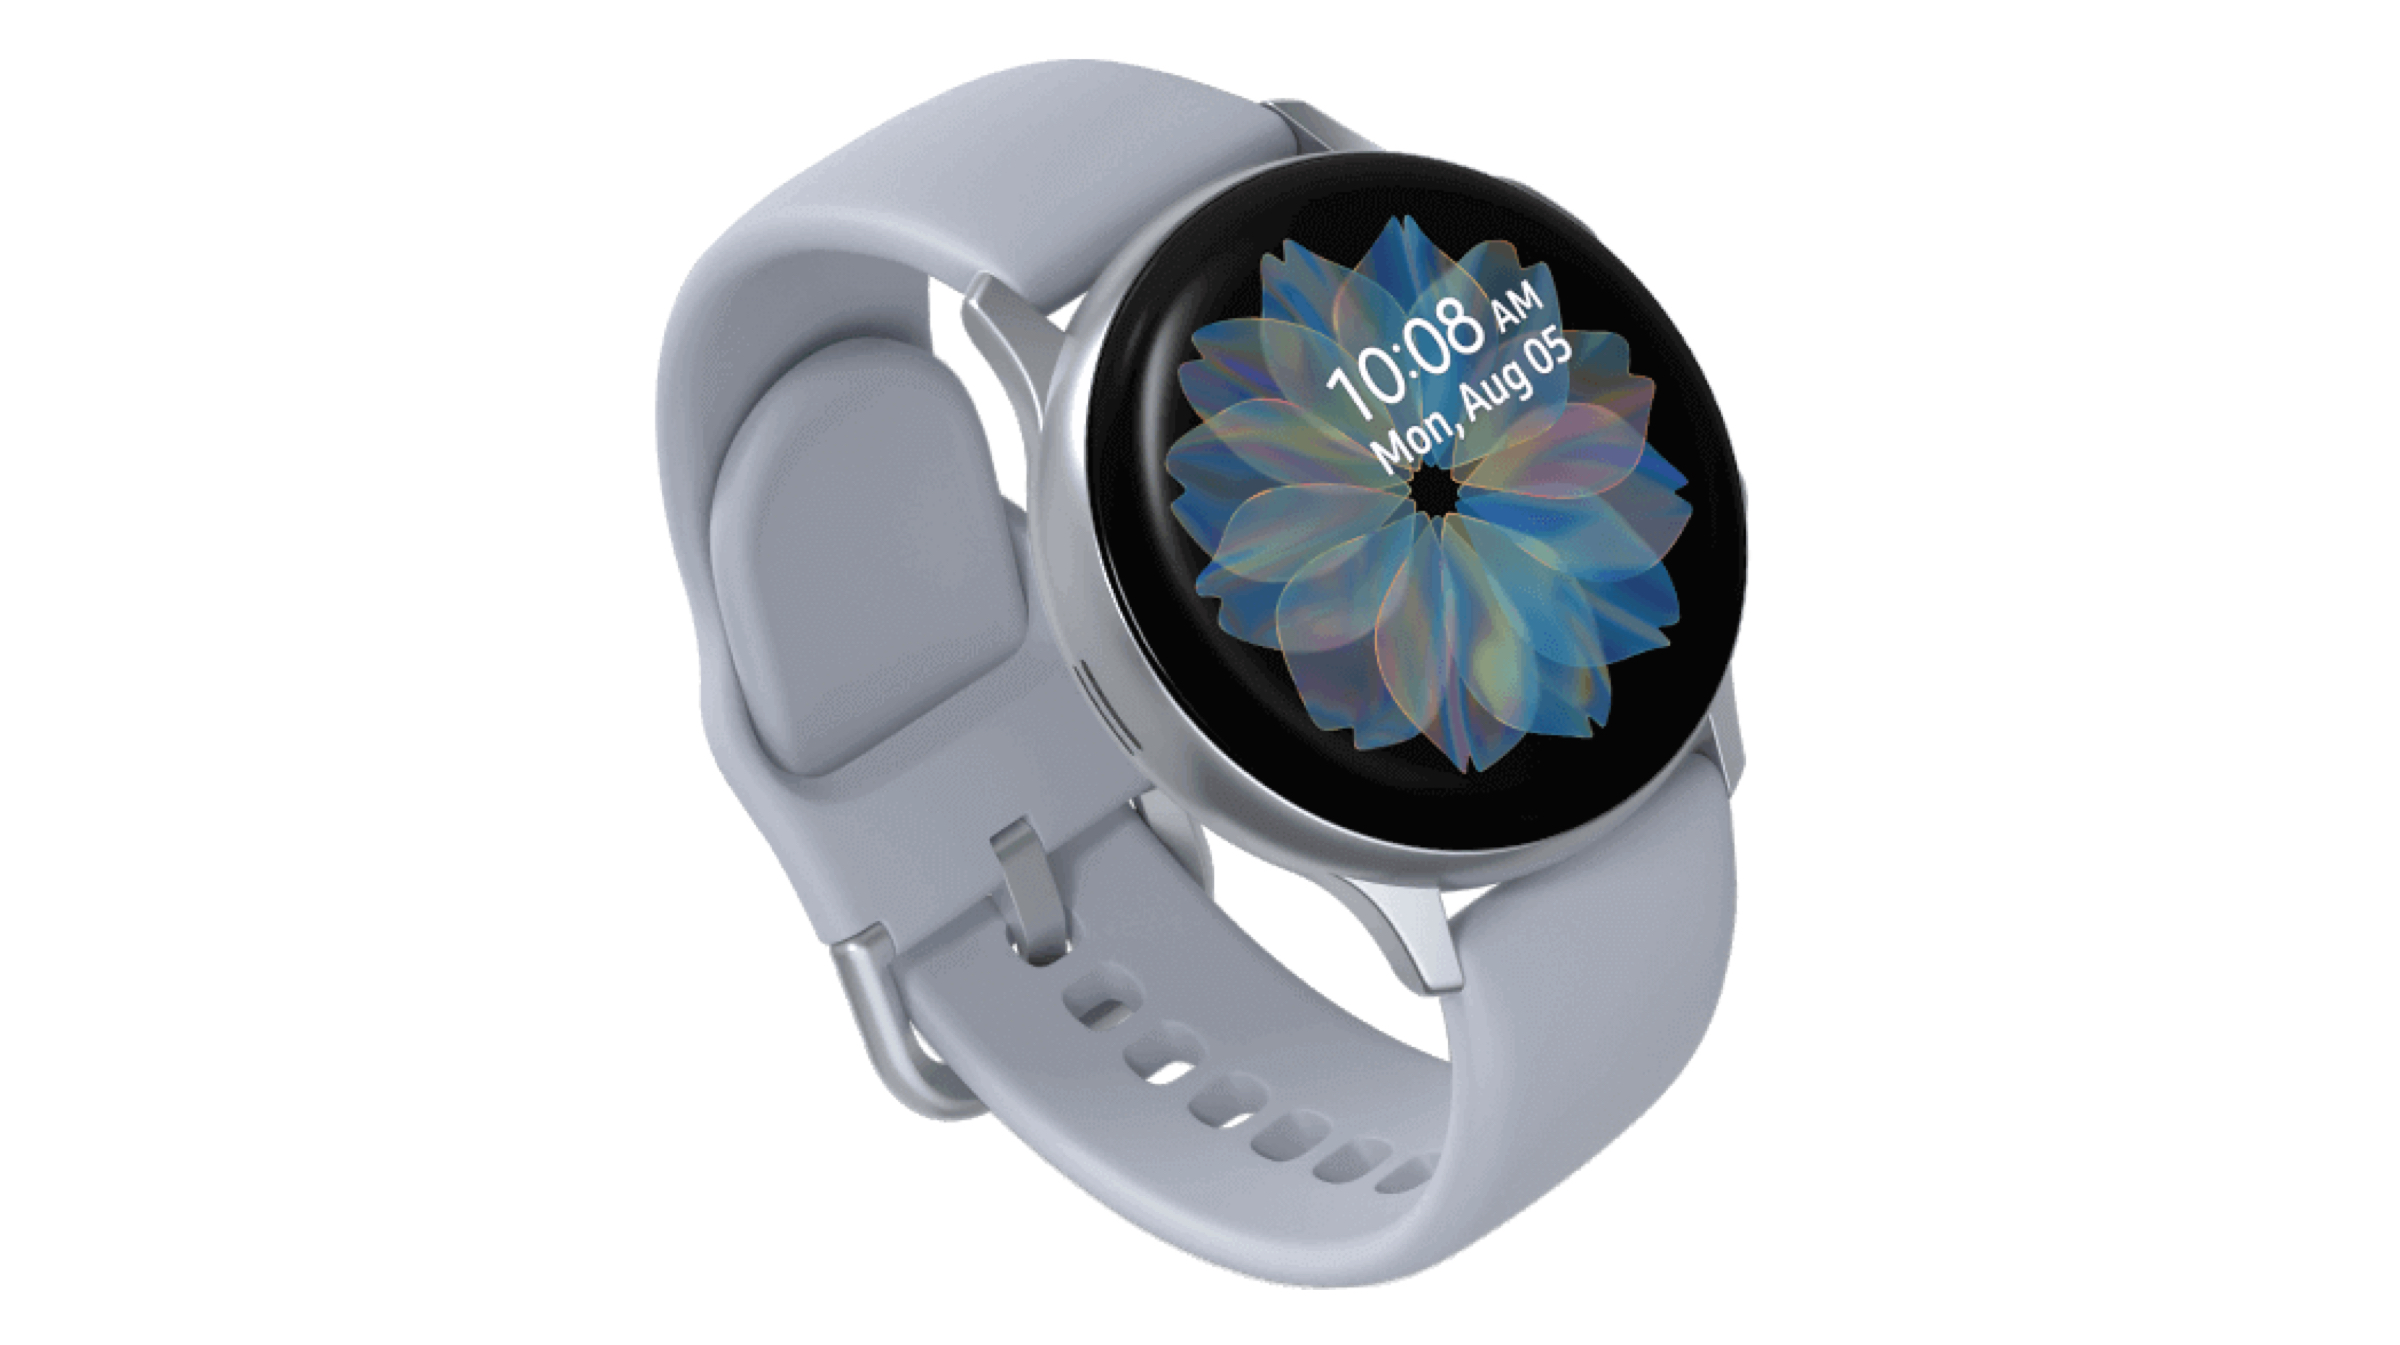 Samsung Galaxy Watch Active 2 Launched, Full Specs & Price | iGyaan